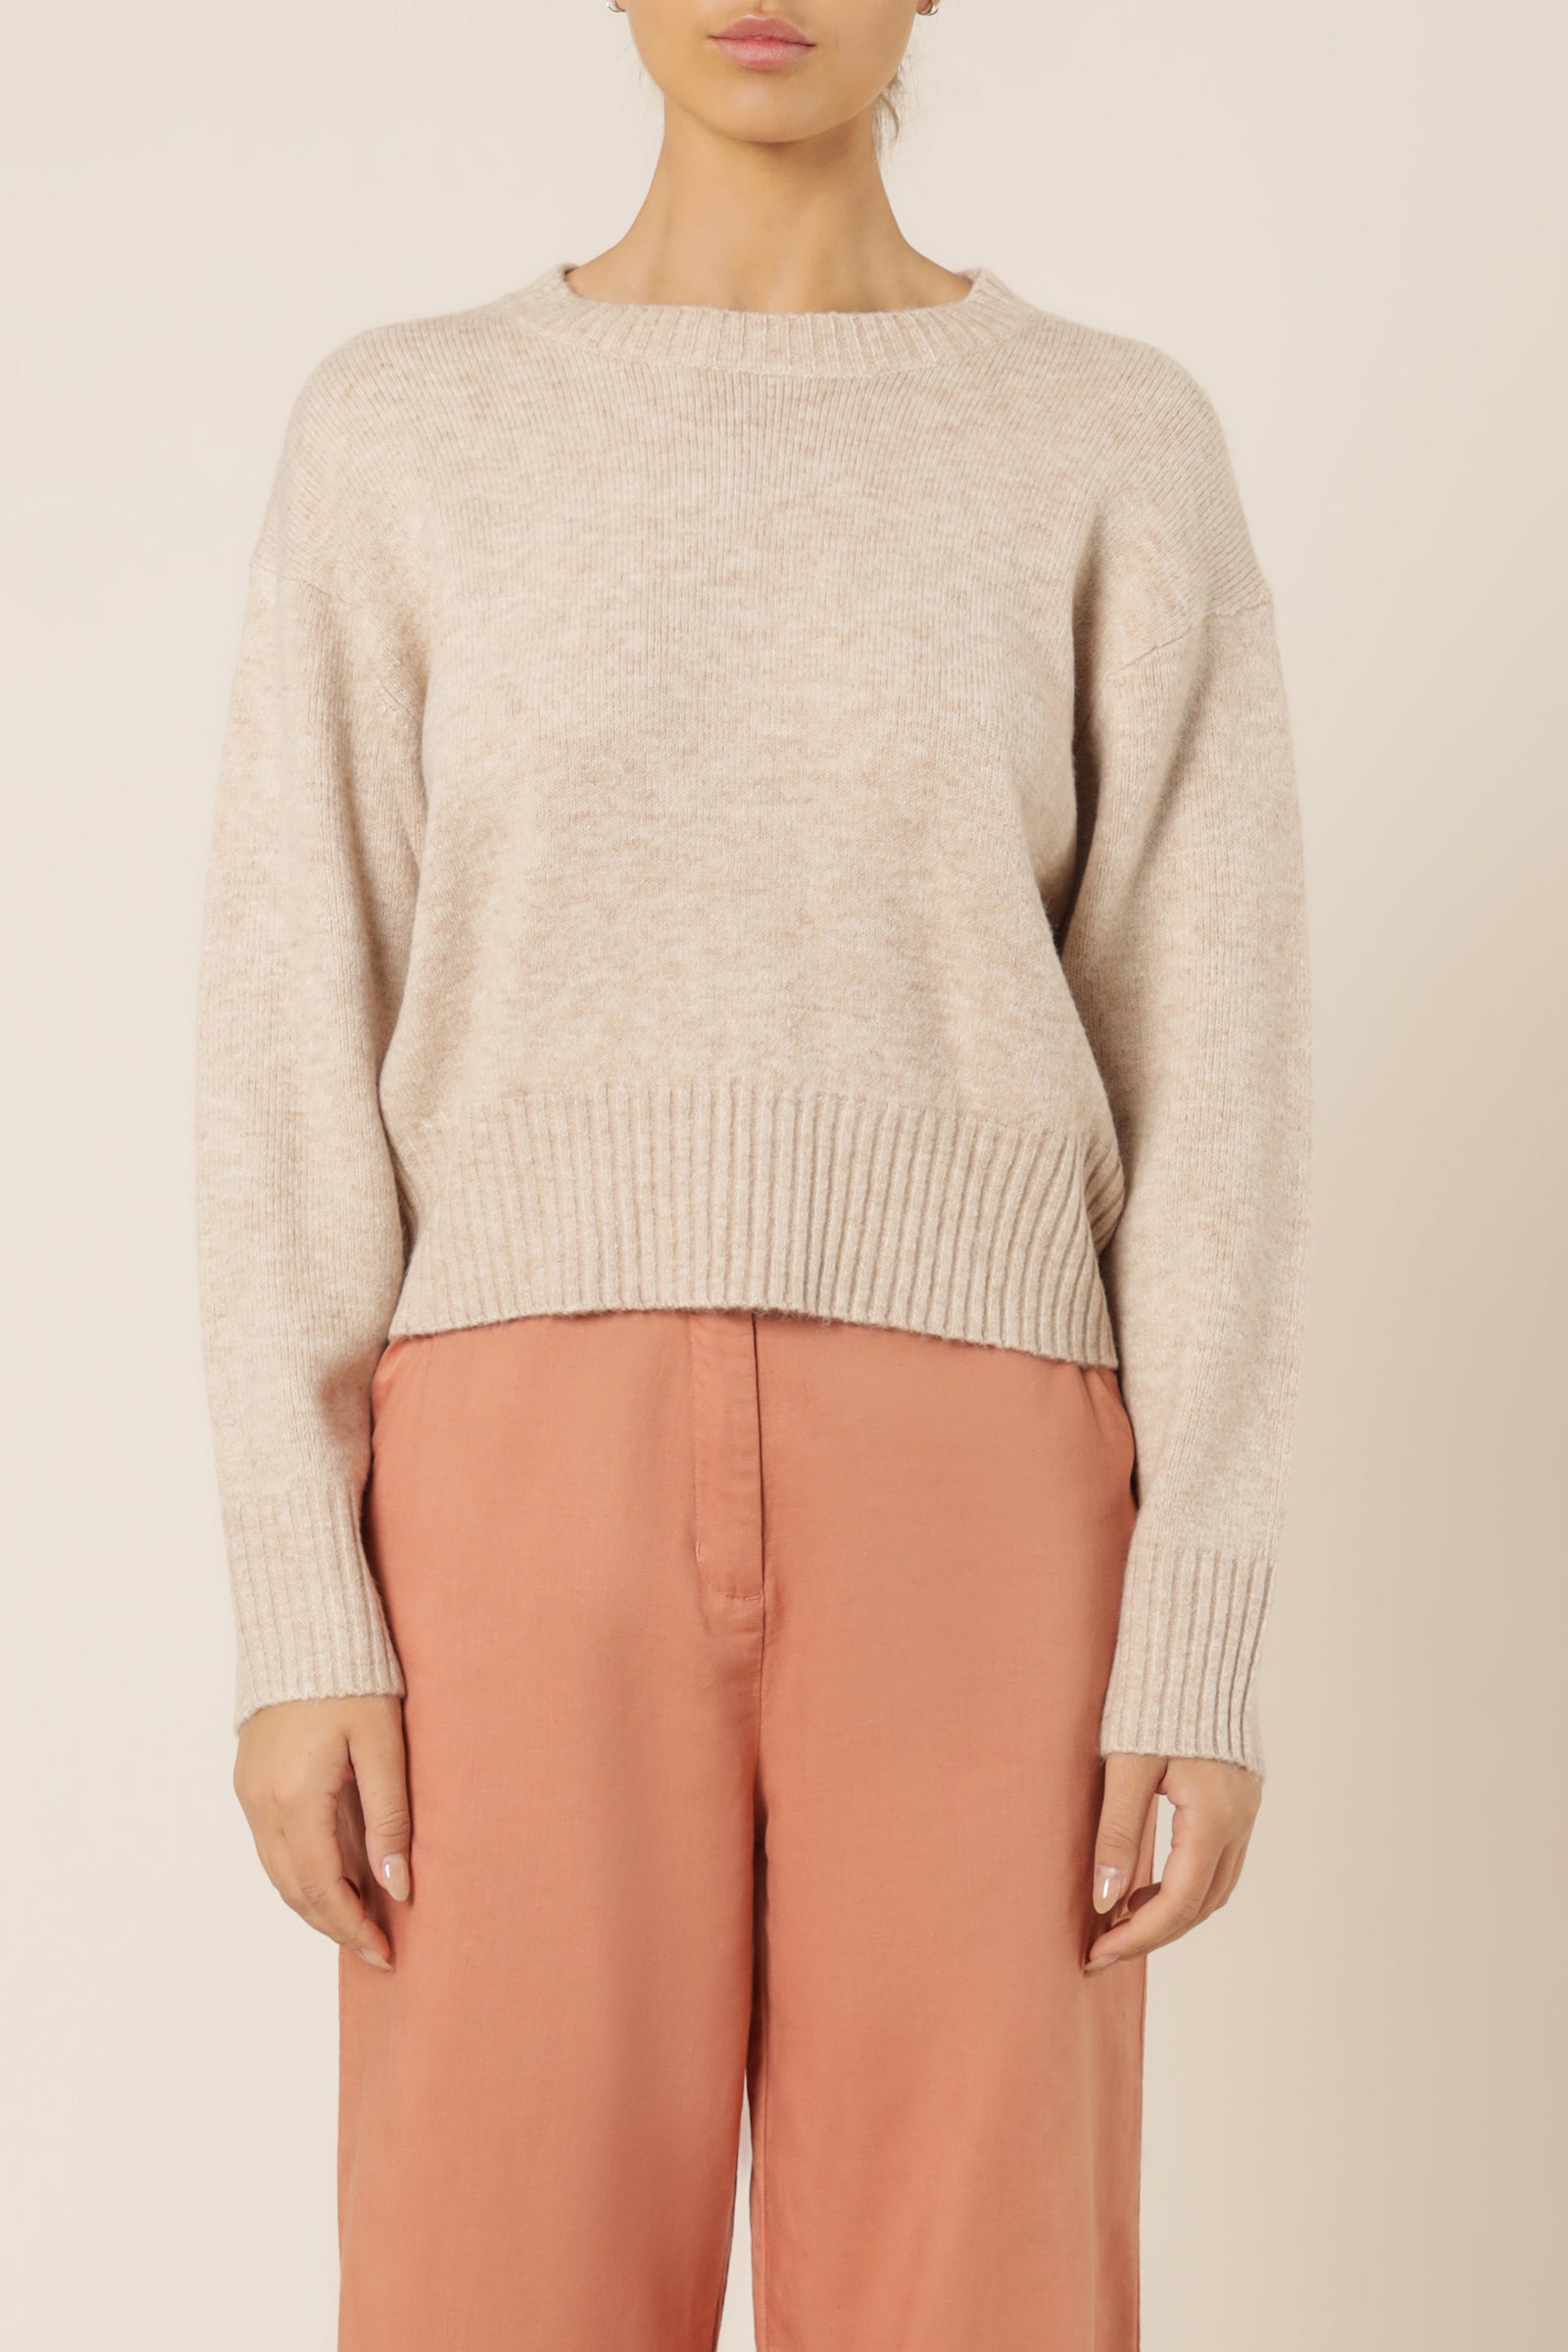 Nude Lucy ari knit jumper sand knits